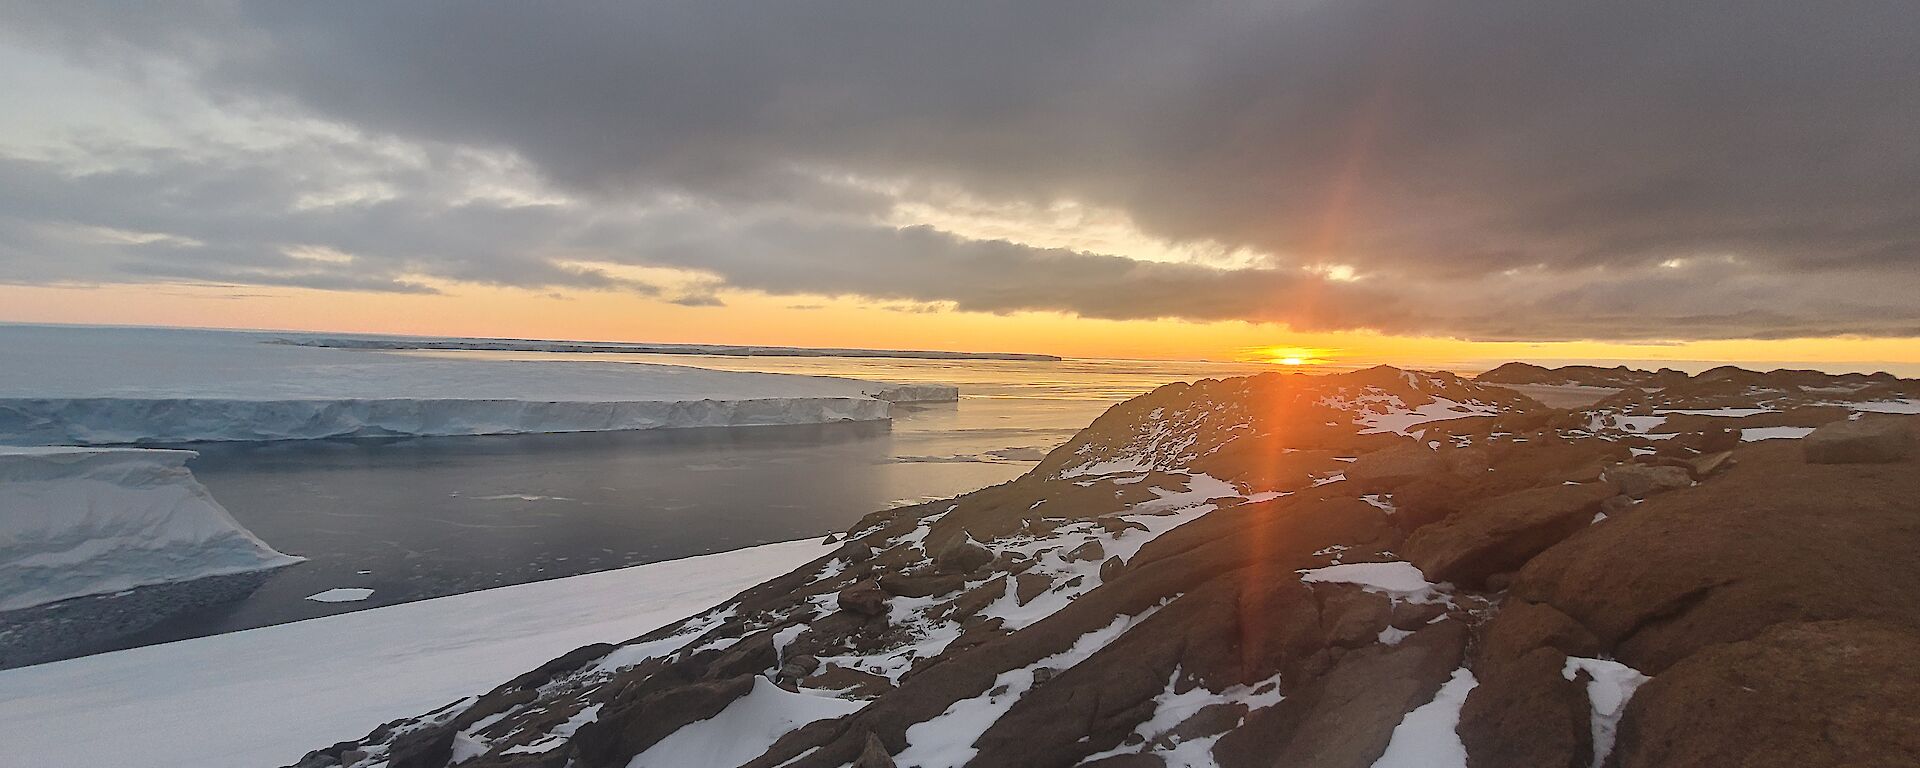 The sun setting over the ocean, beneath low clouds, viewed from some low, rocky hills strewn with snow. Across the water to one side is a glacier, appearing like flat-topped cliffs of ice edging the ocean